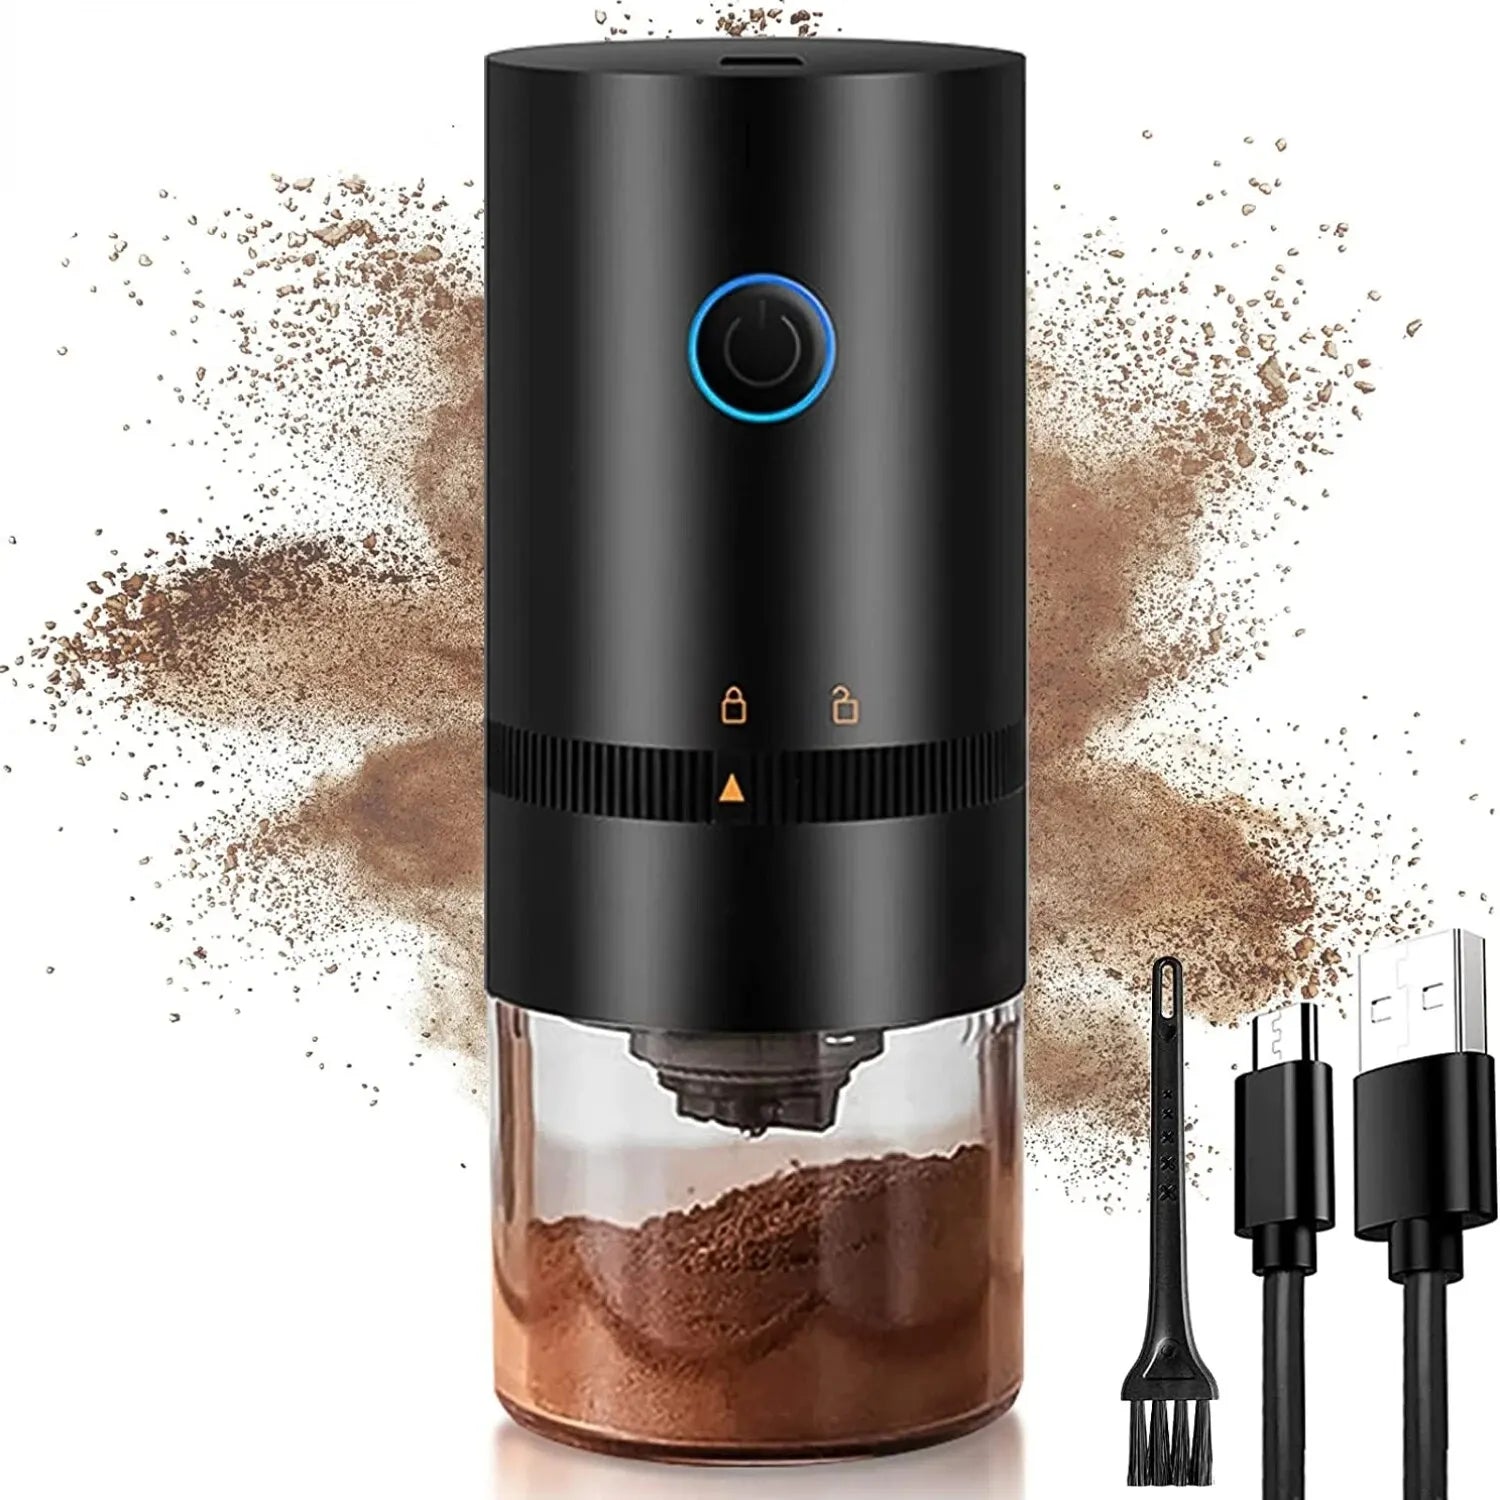 Portable Electric Coffee Grinder TYPE C USB Charge Professional Ceramic Grinding Coffee Beans - Supersell